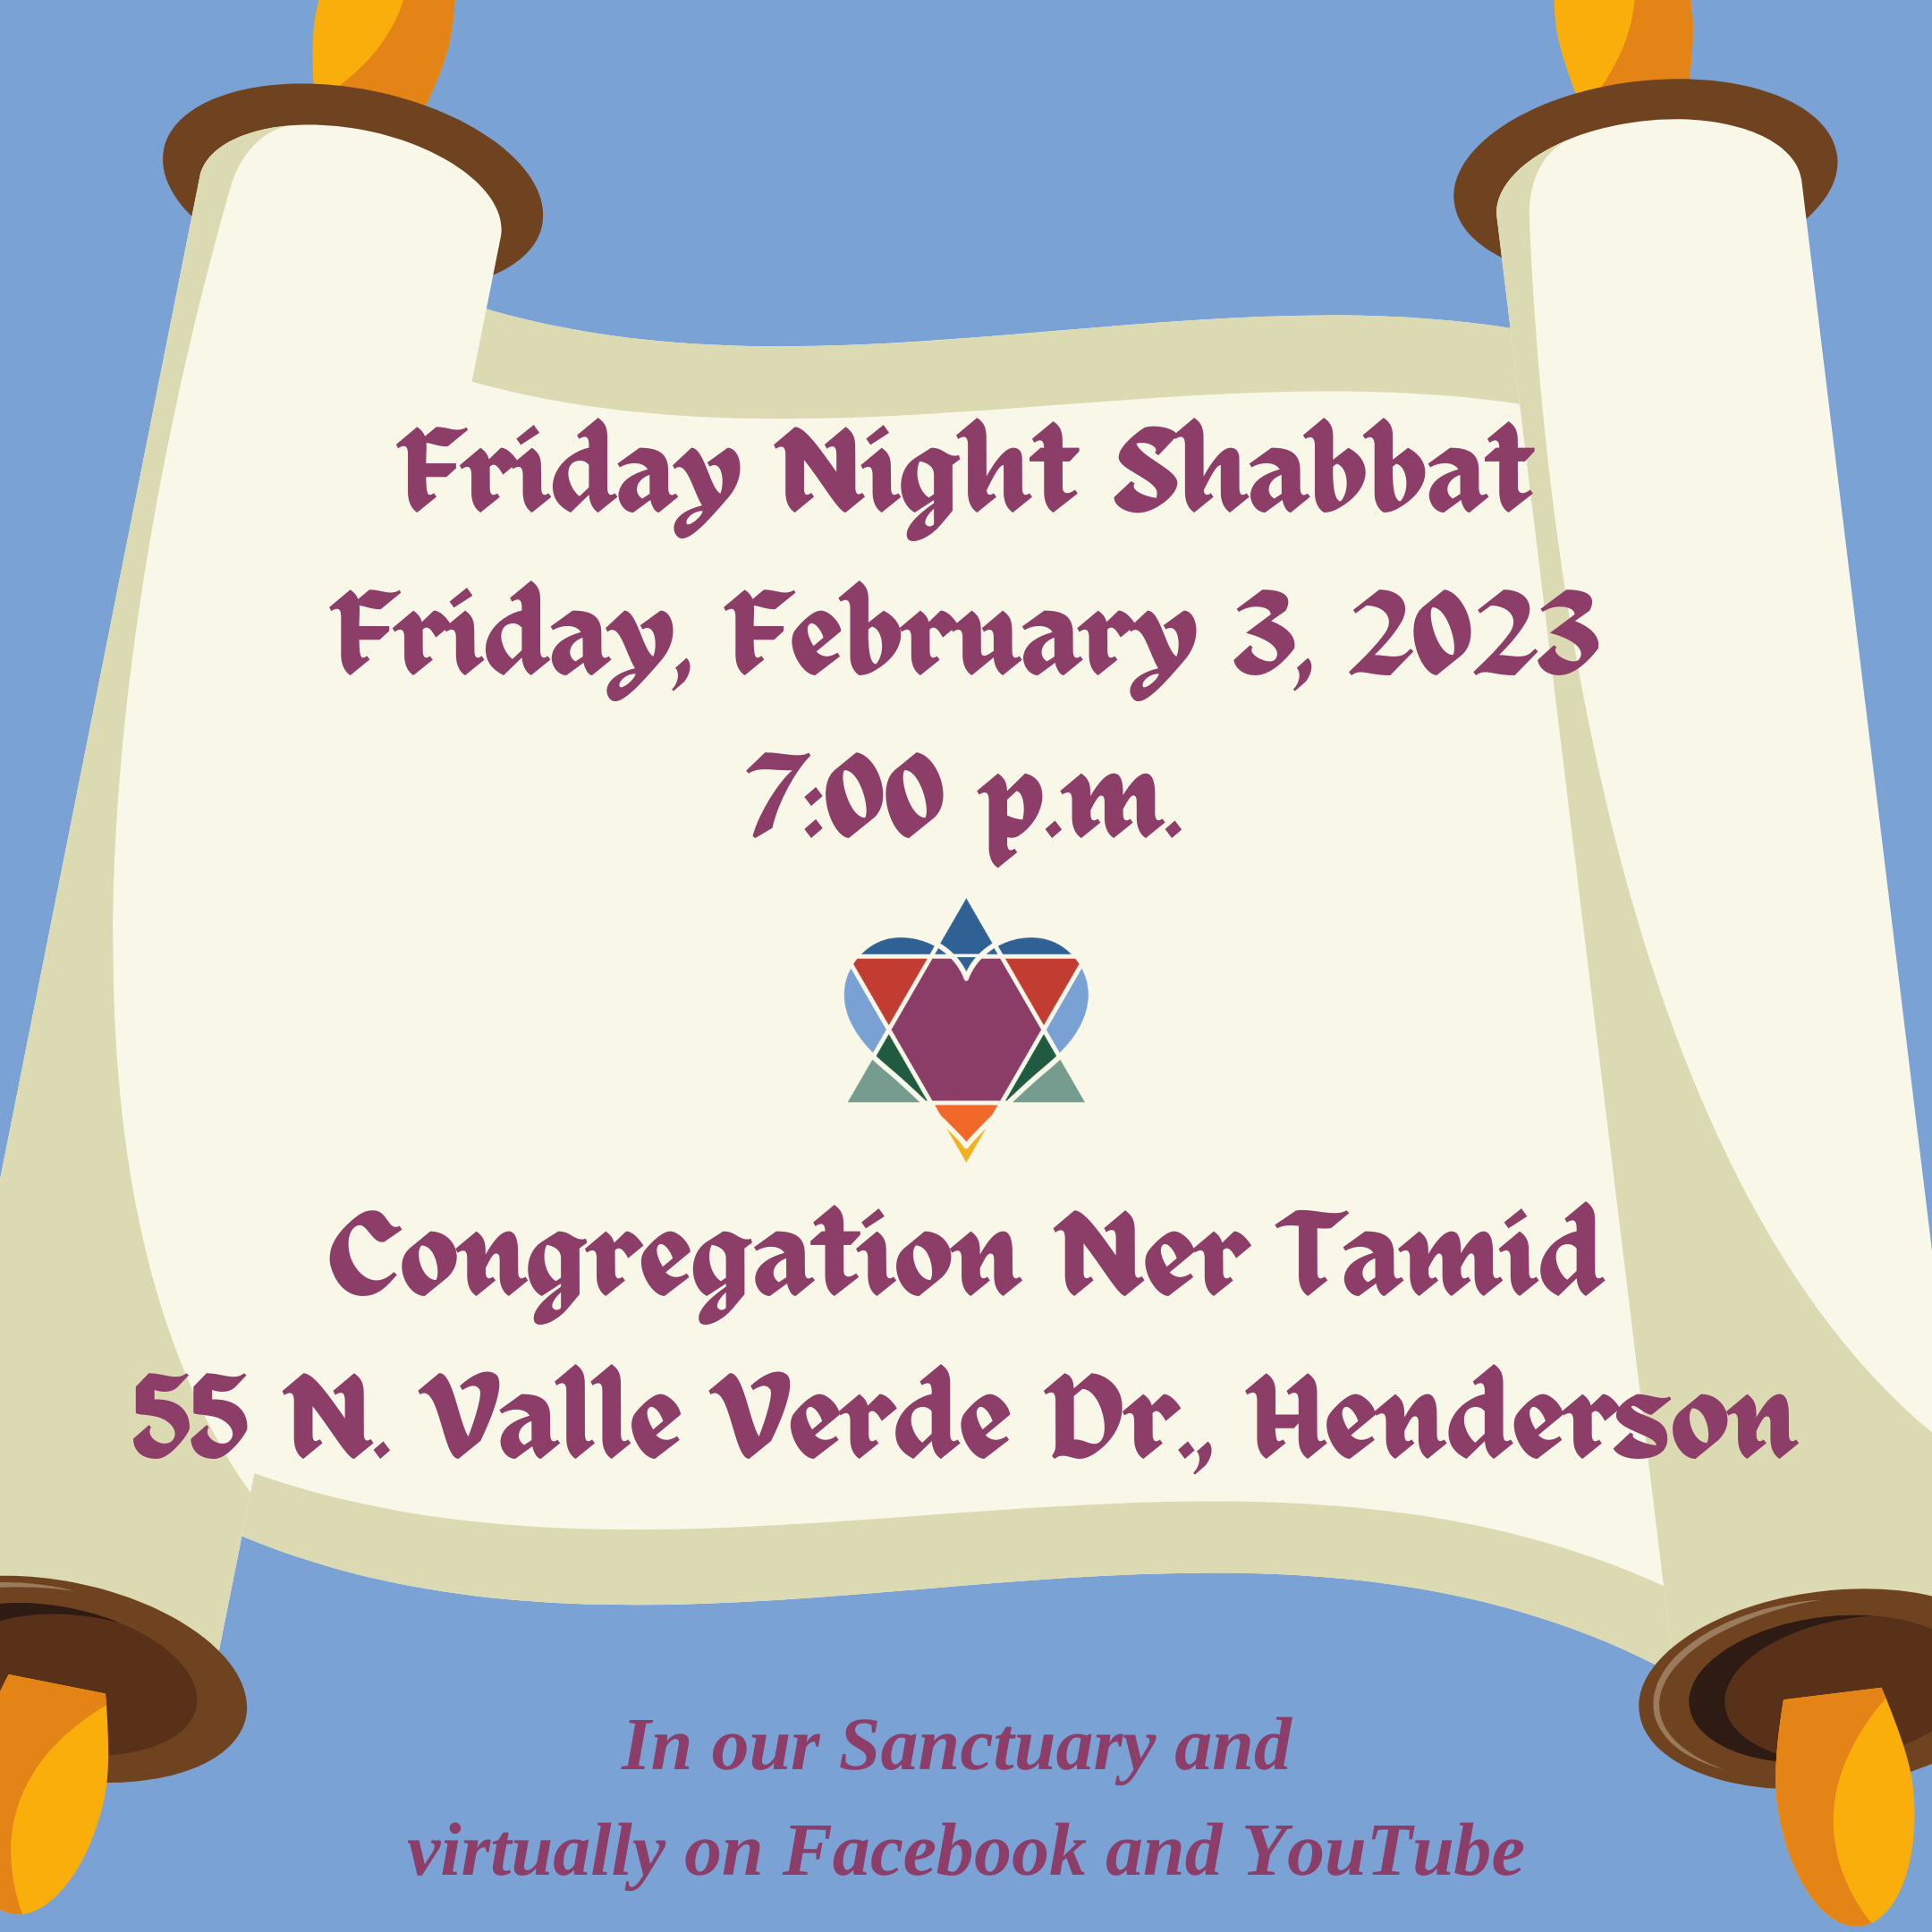 FRIDAY NIGHT SHABBAT AND DISCUSSION WITH RABBI AKSELRAD